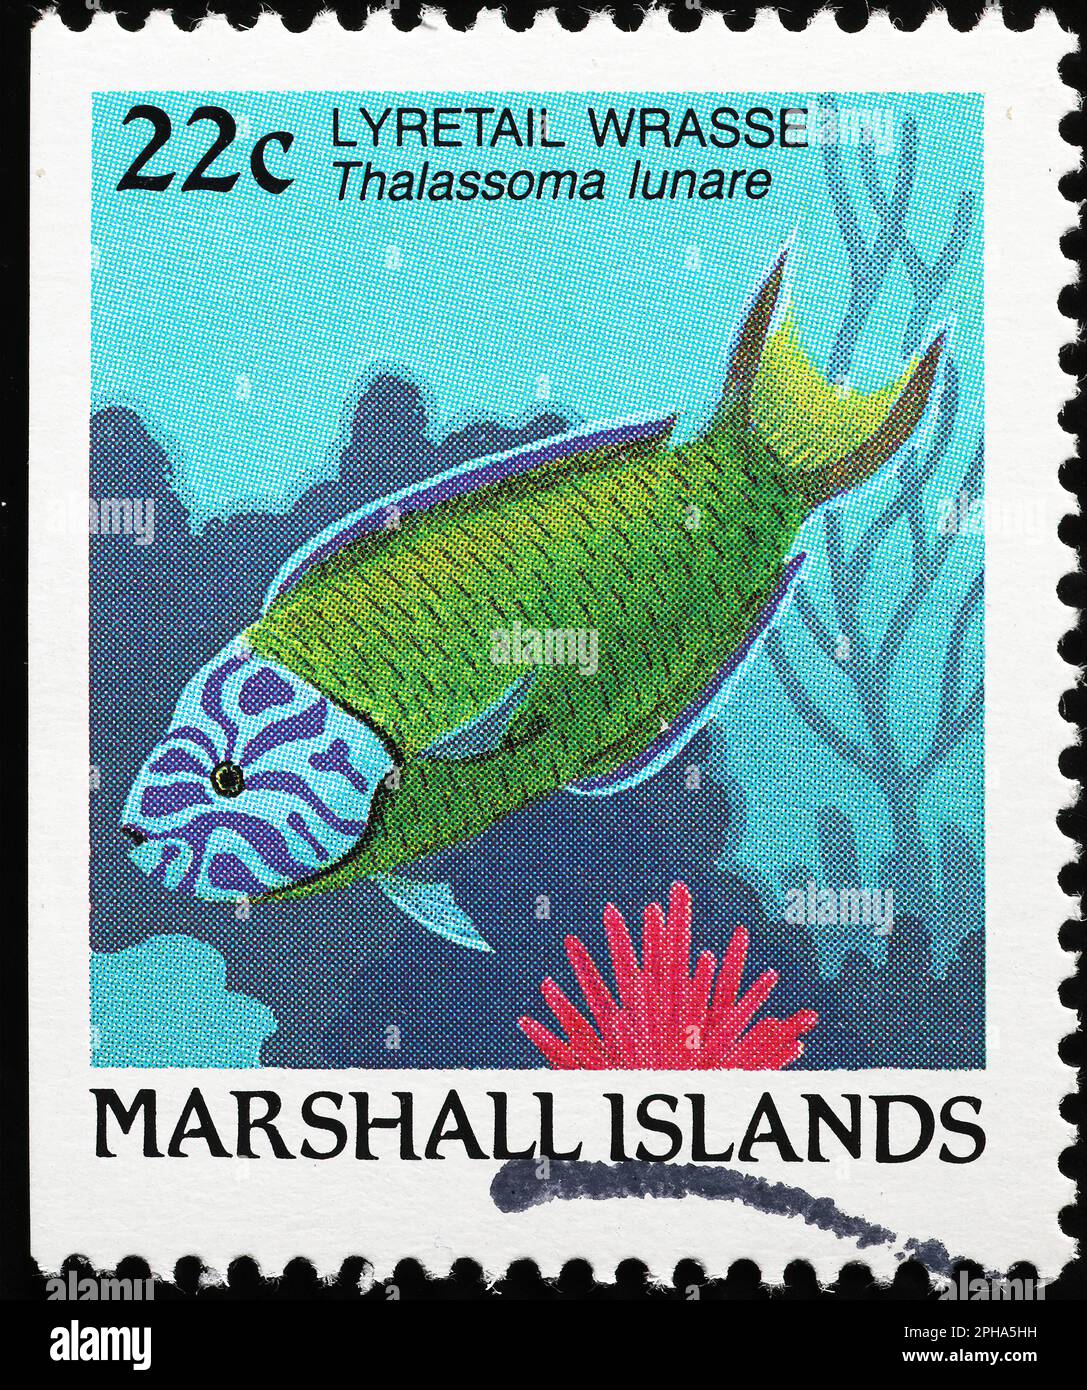 Lyretail wrasse on stamp of Marshall Islands Stock Photo